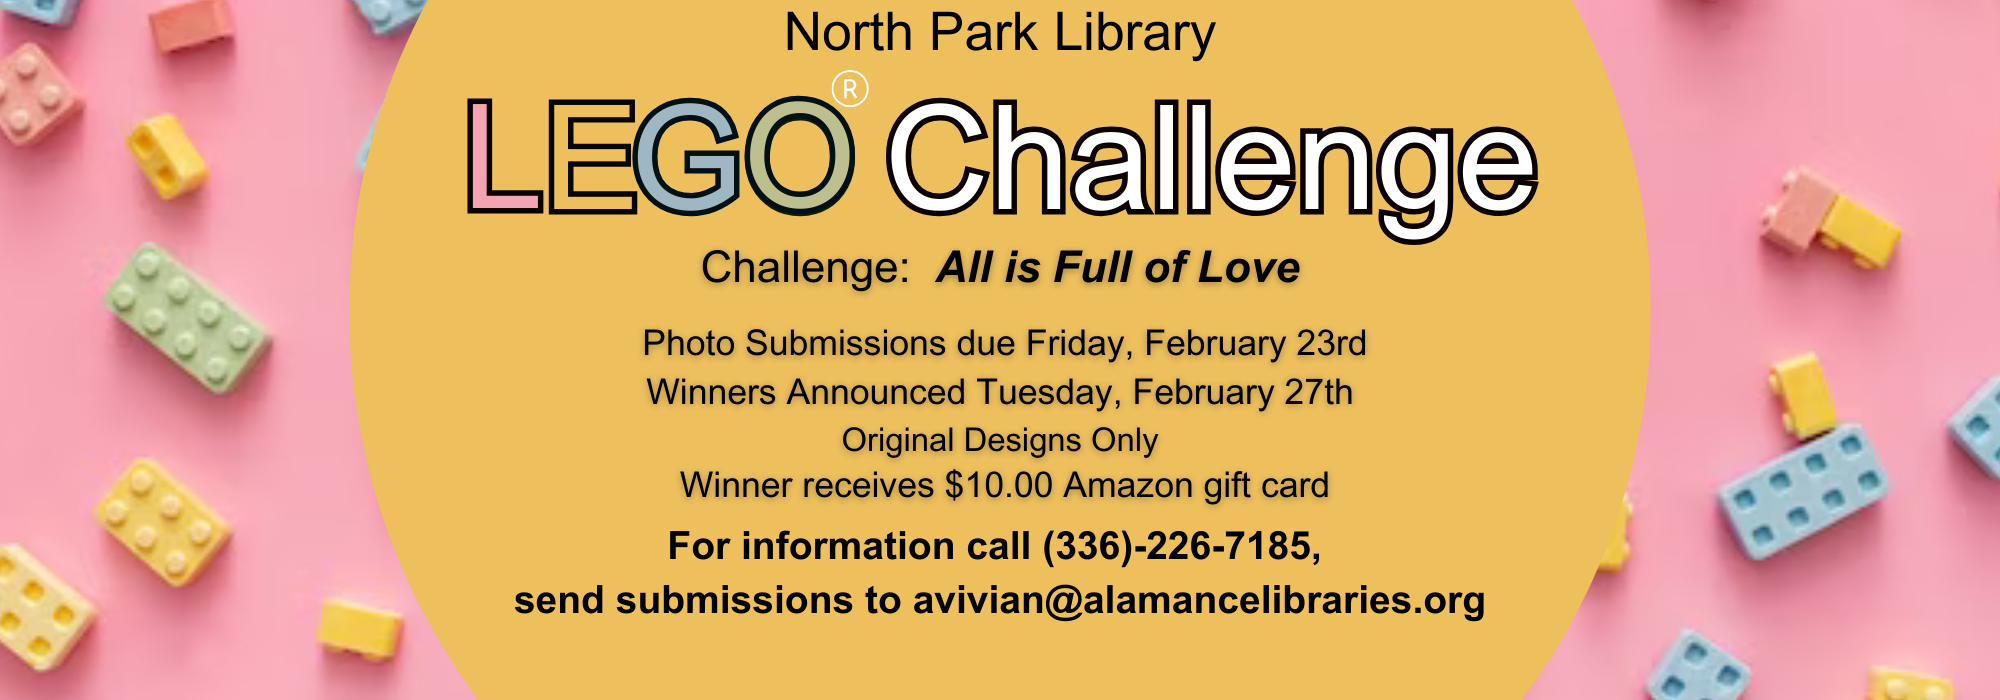 LEGO Challenge at North Park in February